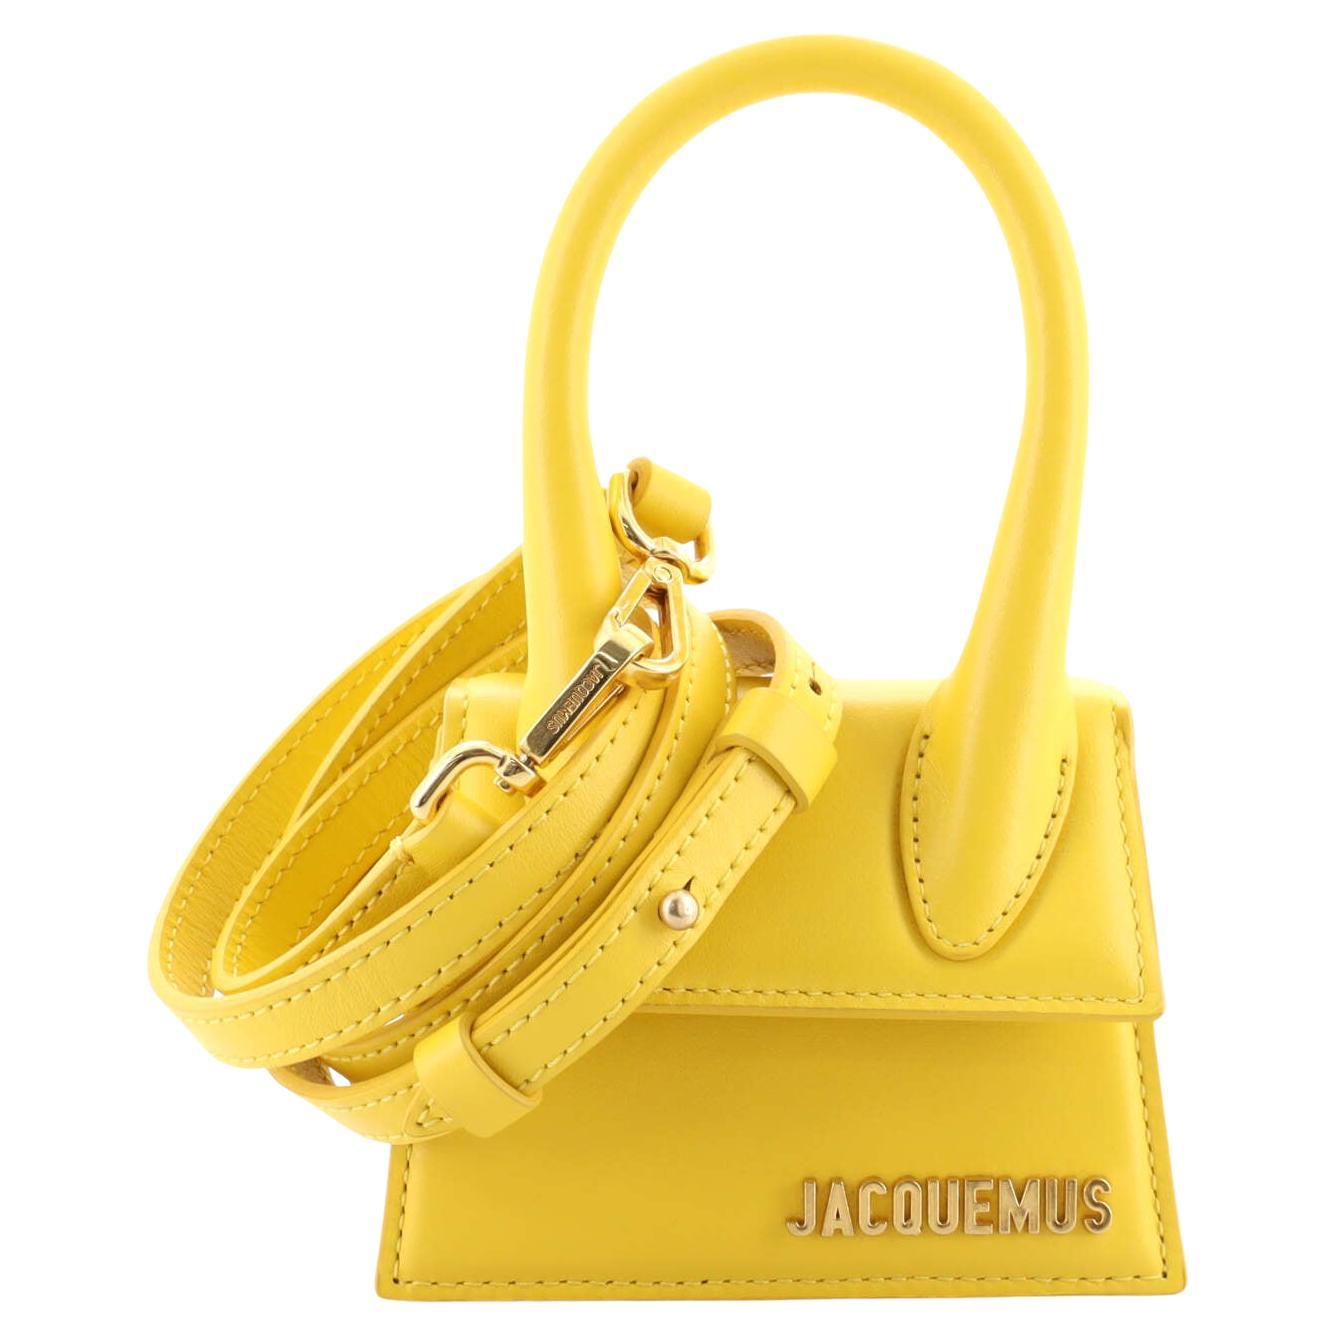 Jacquemus Chiquito - 2 For Sale on 1stDibs